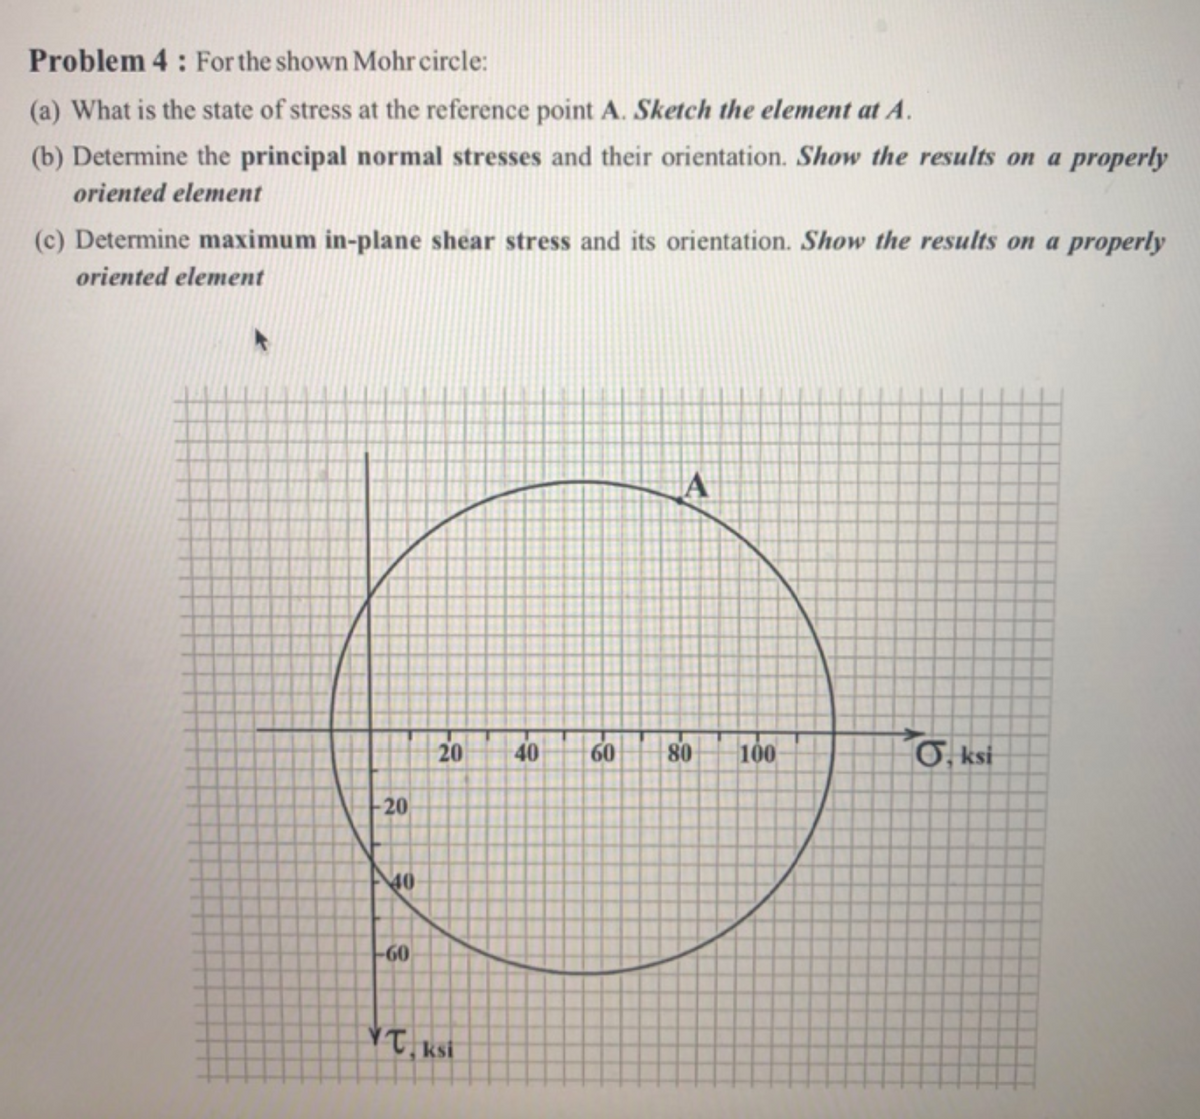 Problem 4 : For the shown Mohr circle:
(a) What is the state of stress at the reference point A. Sketch the element at A.
(b) Determine the principal normal stresses and their orientation. Show the results on a properly
oriented element
(c) Determine maximum in-plane shear stress and its orientation. Show the results on a properly
oriented element
A
20
40
60
80
100
Ở, ksi
20
40
-60
